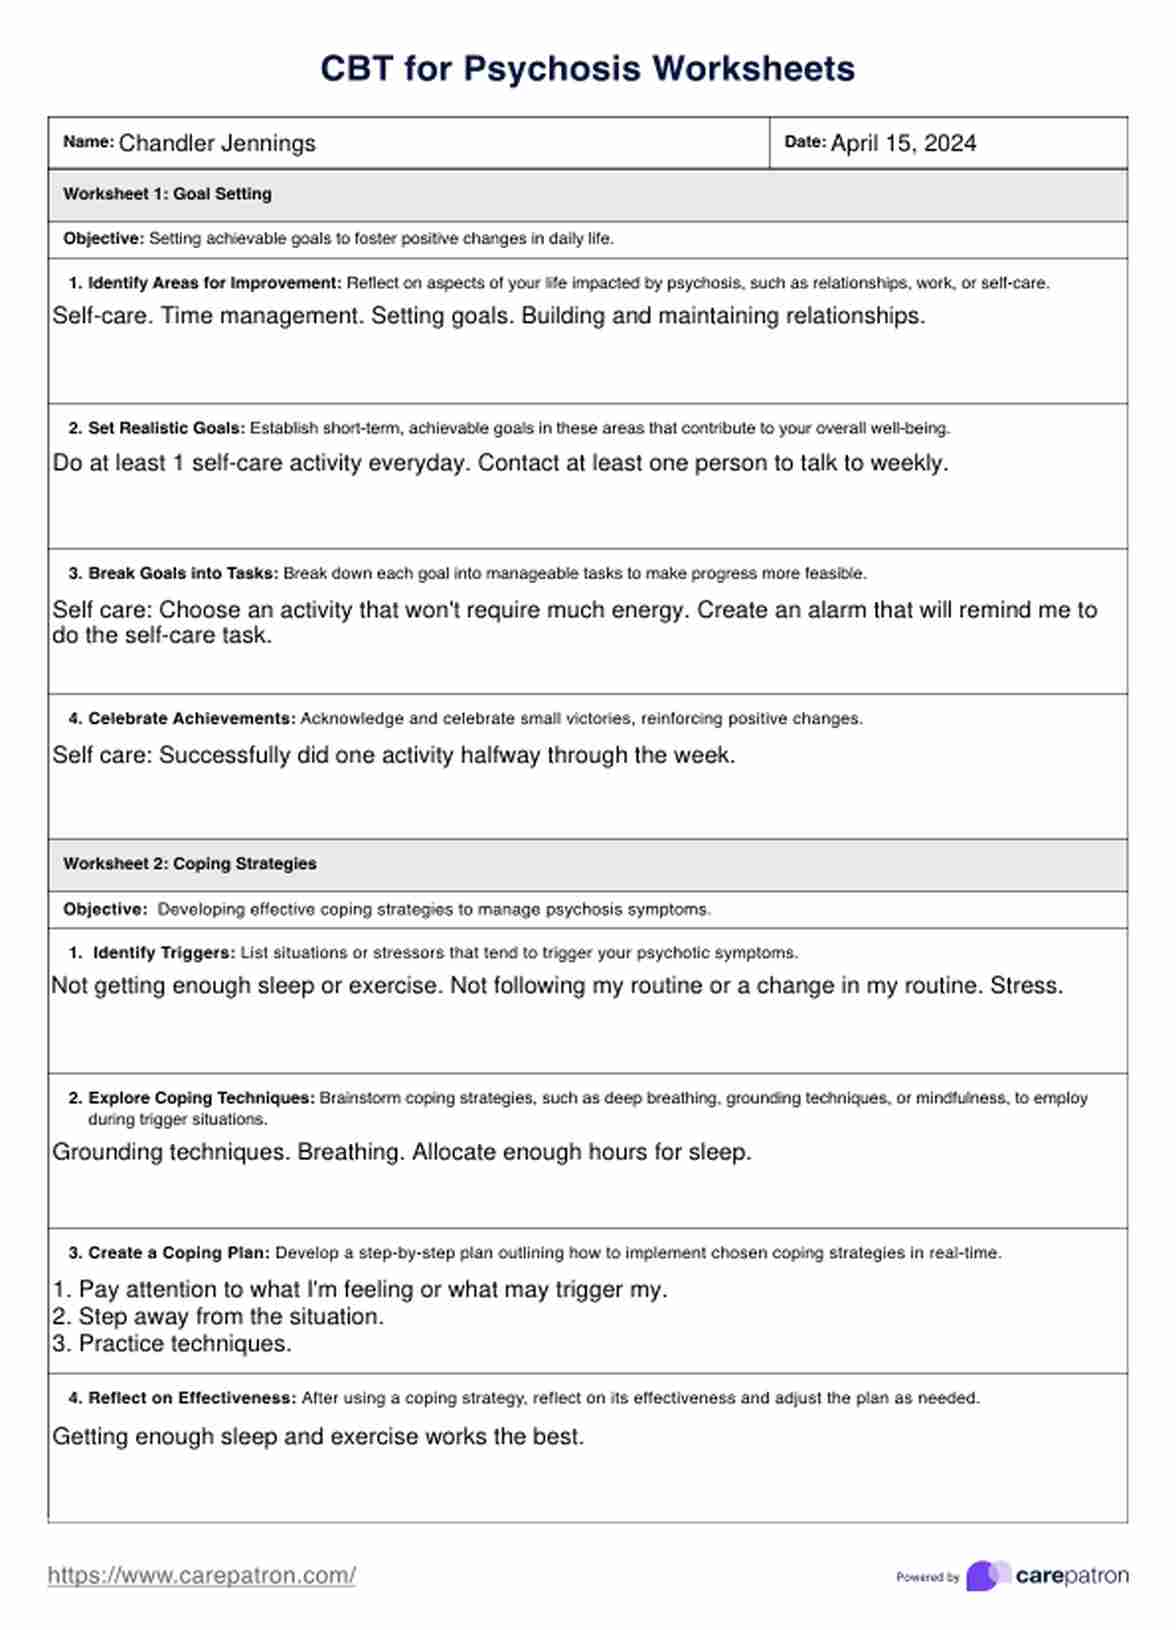 CBT for Psychosis Worksheets PDF Example